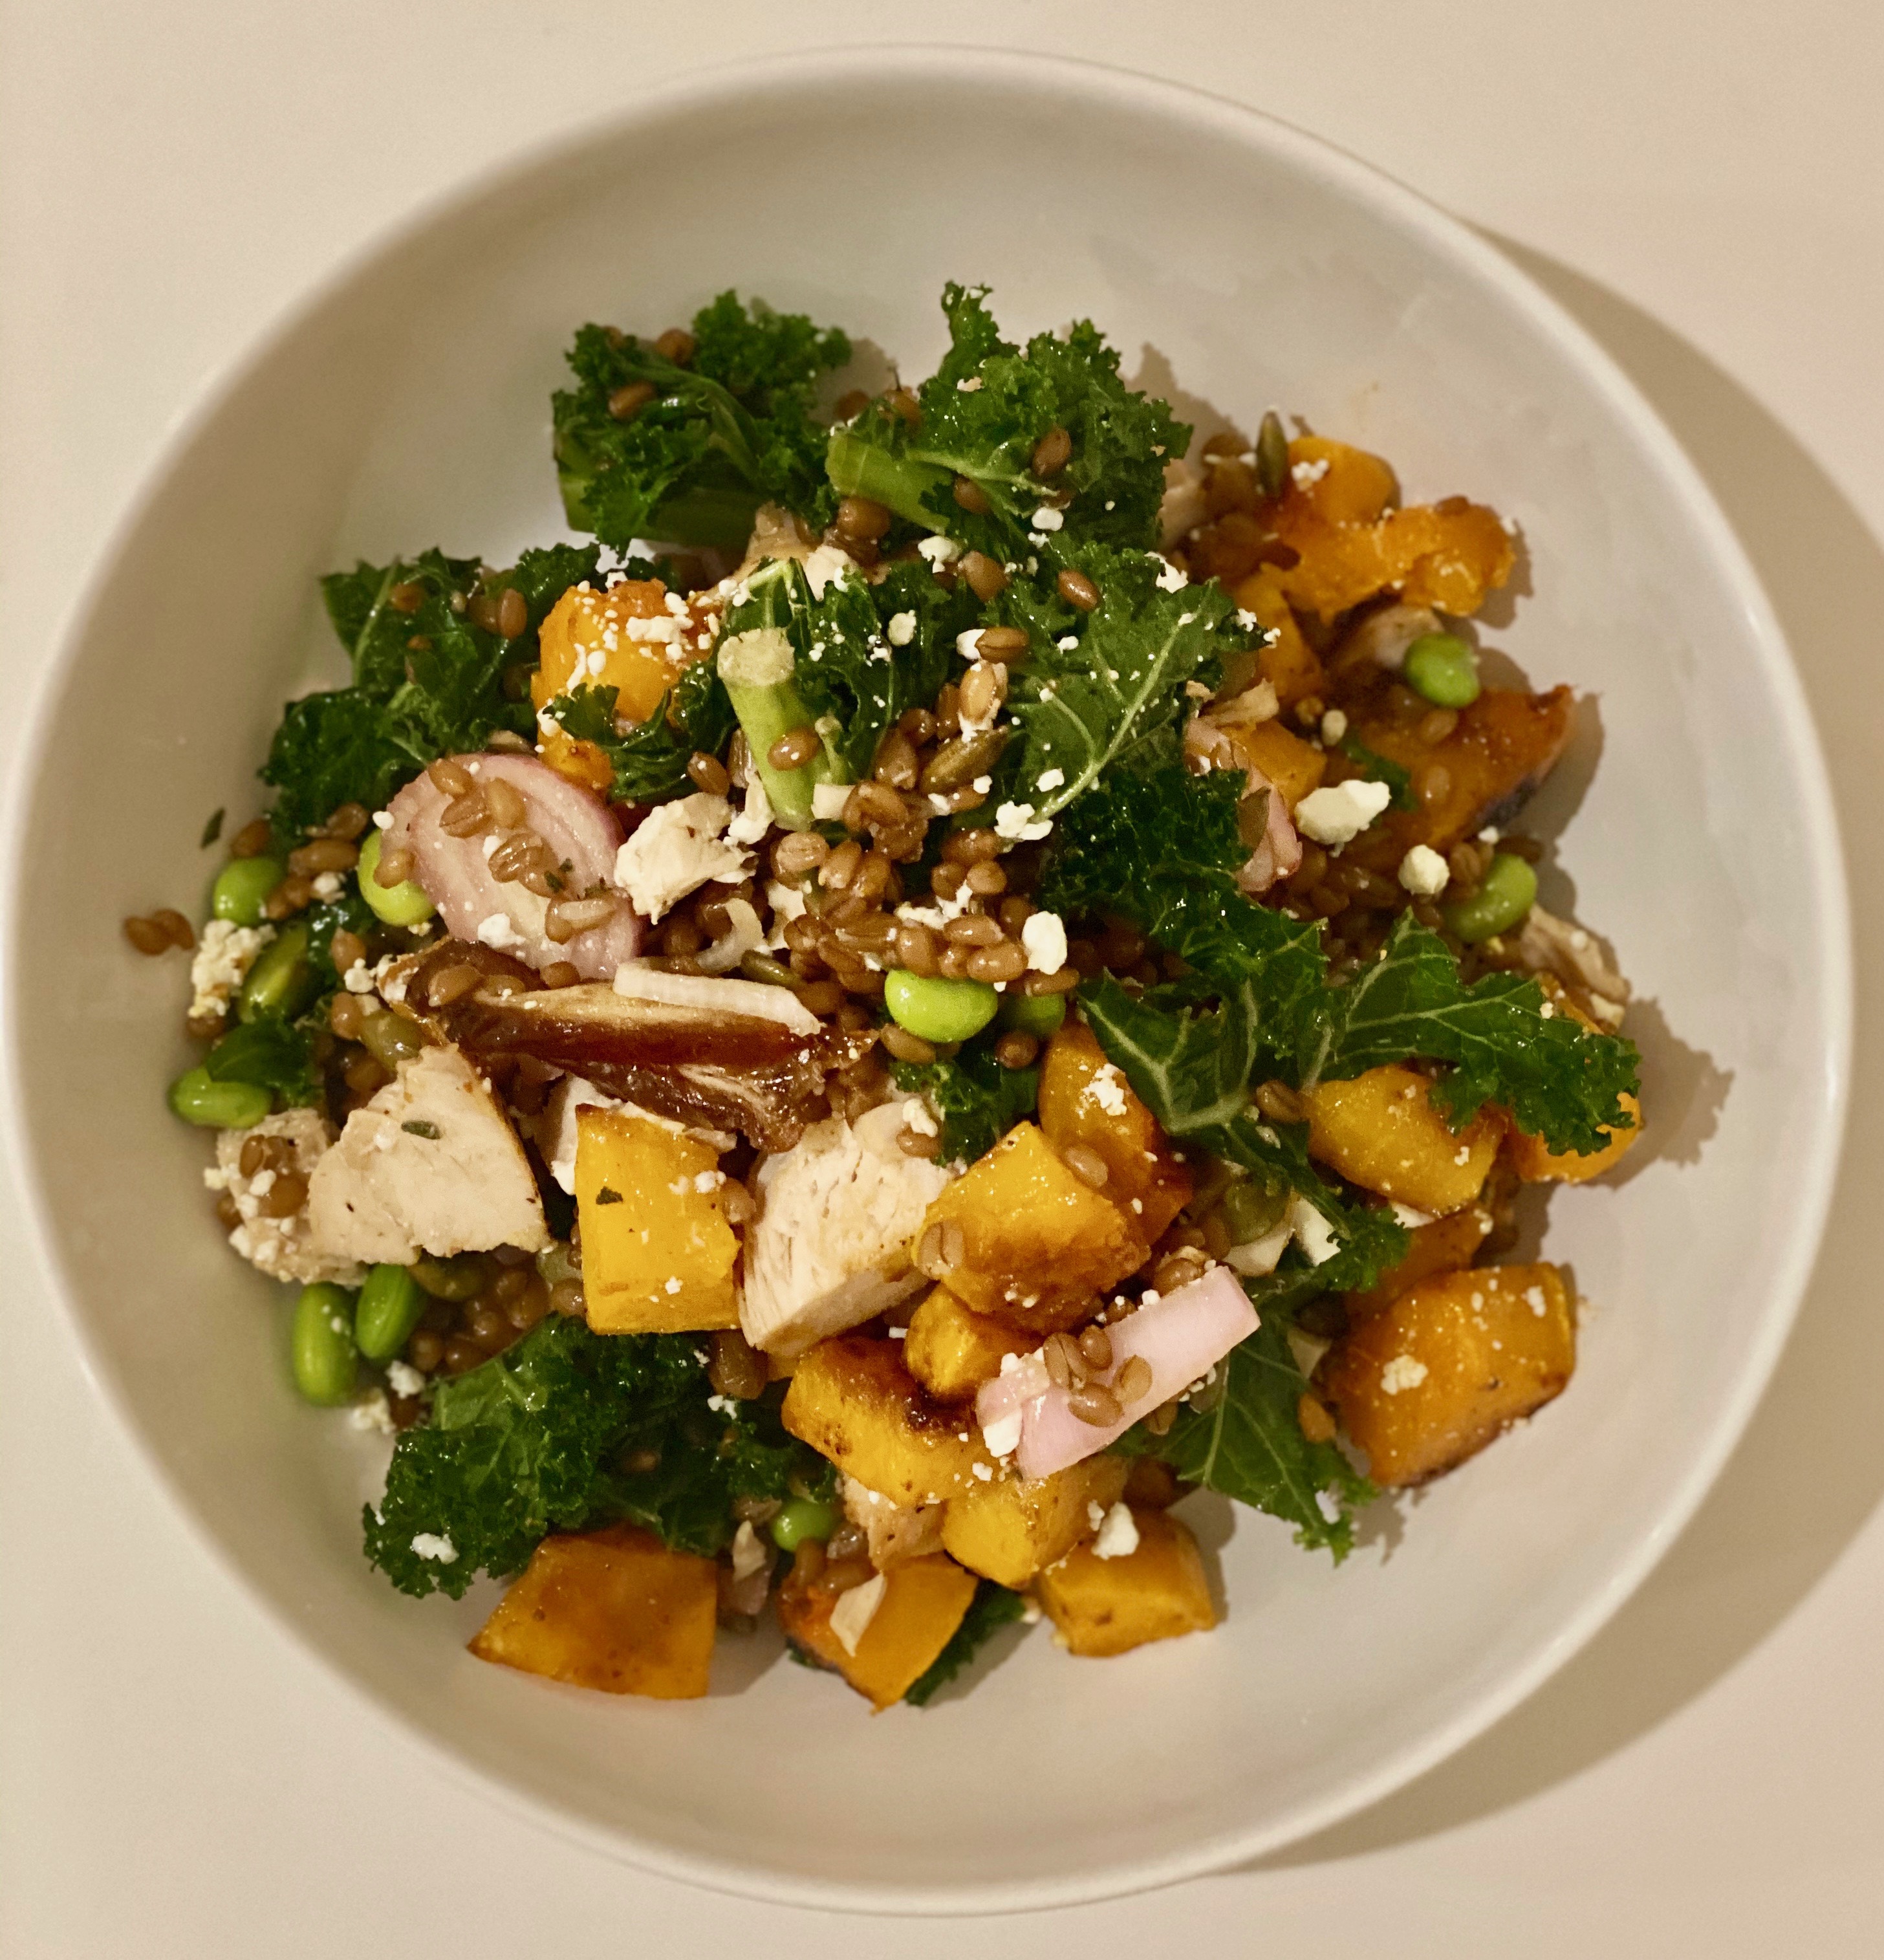 a shallow white bowl filled with shredded green kale, slivered dates, goat cheese and cubed squash